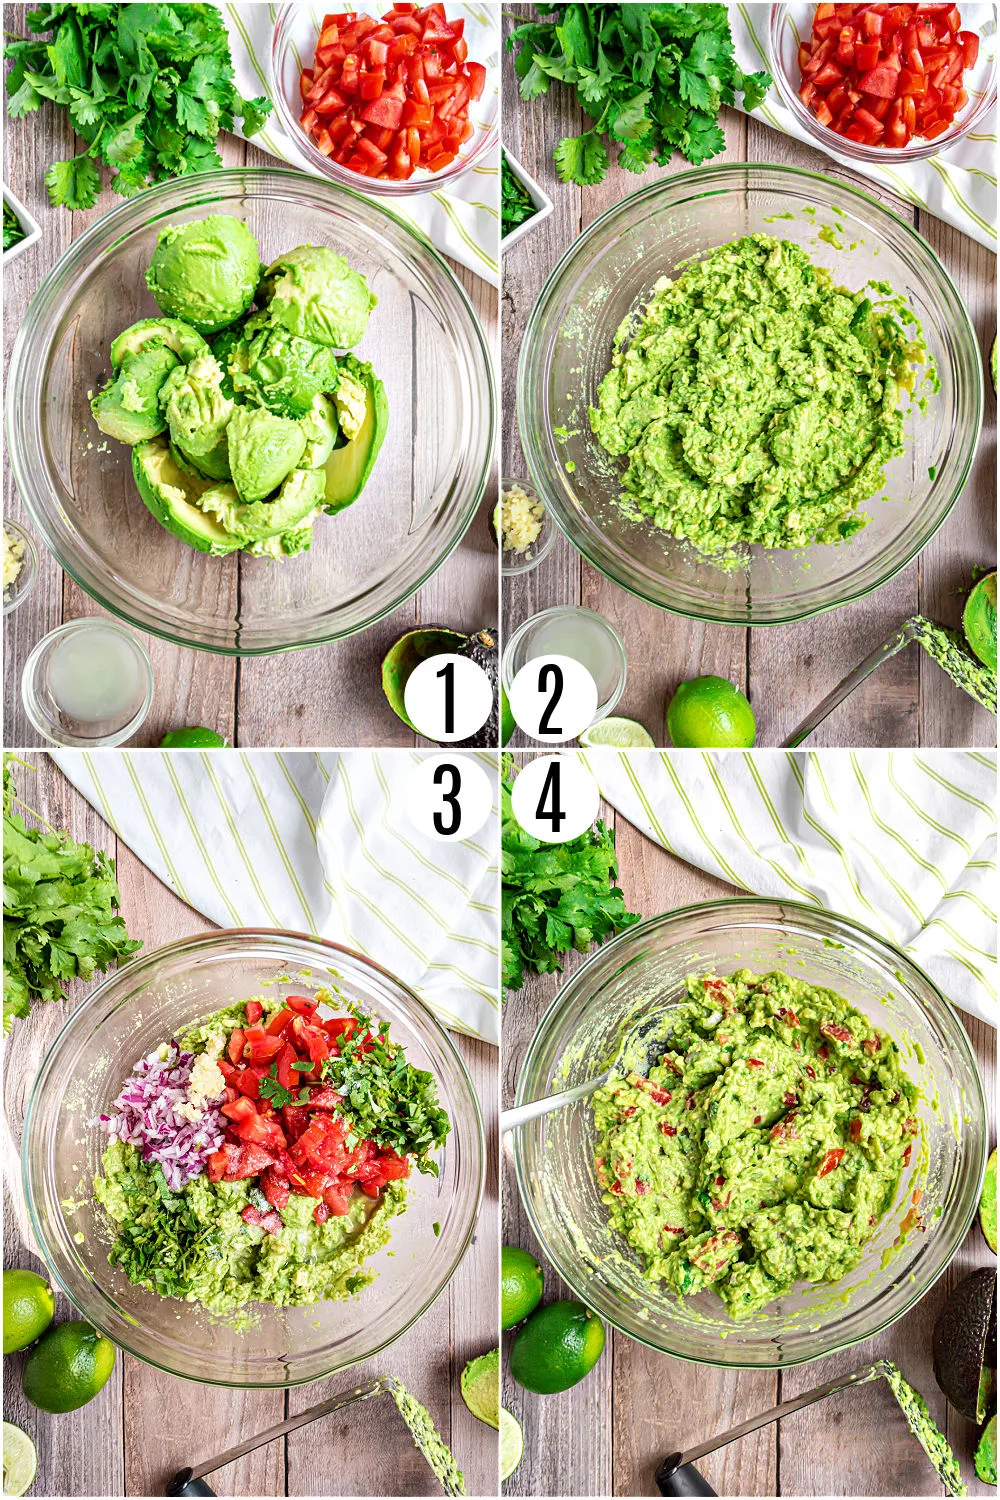 Step by step photos showing how to make chunky guacamole.